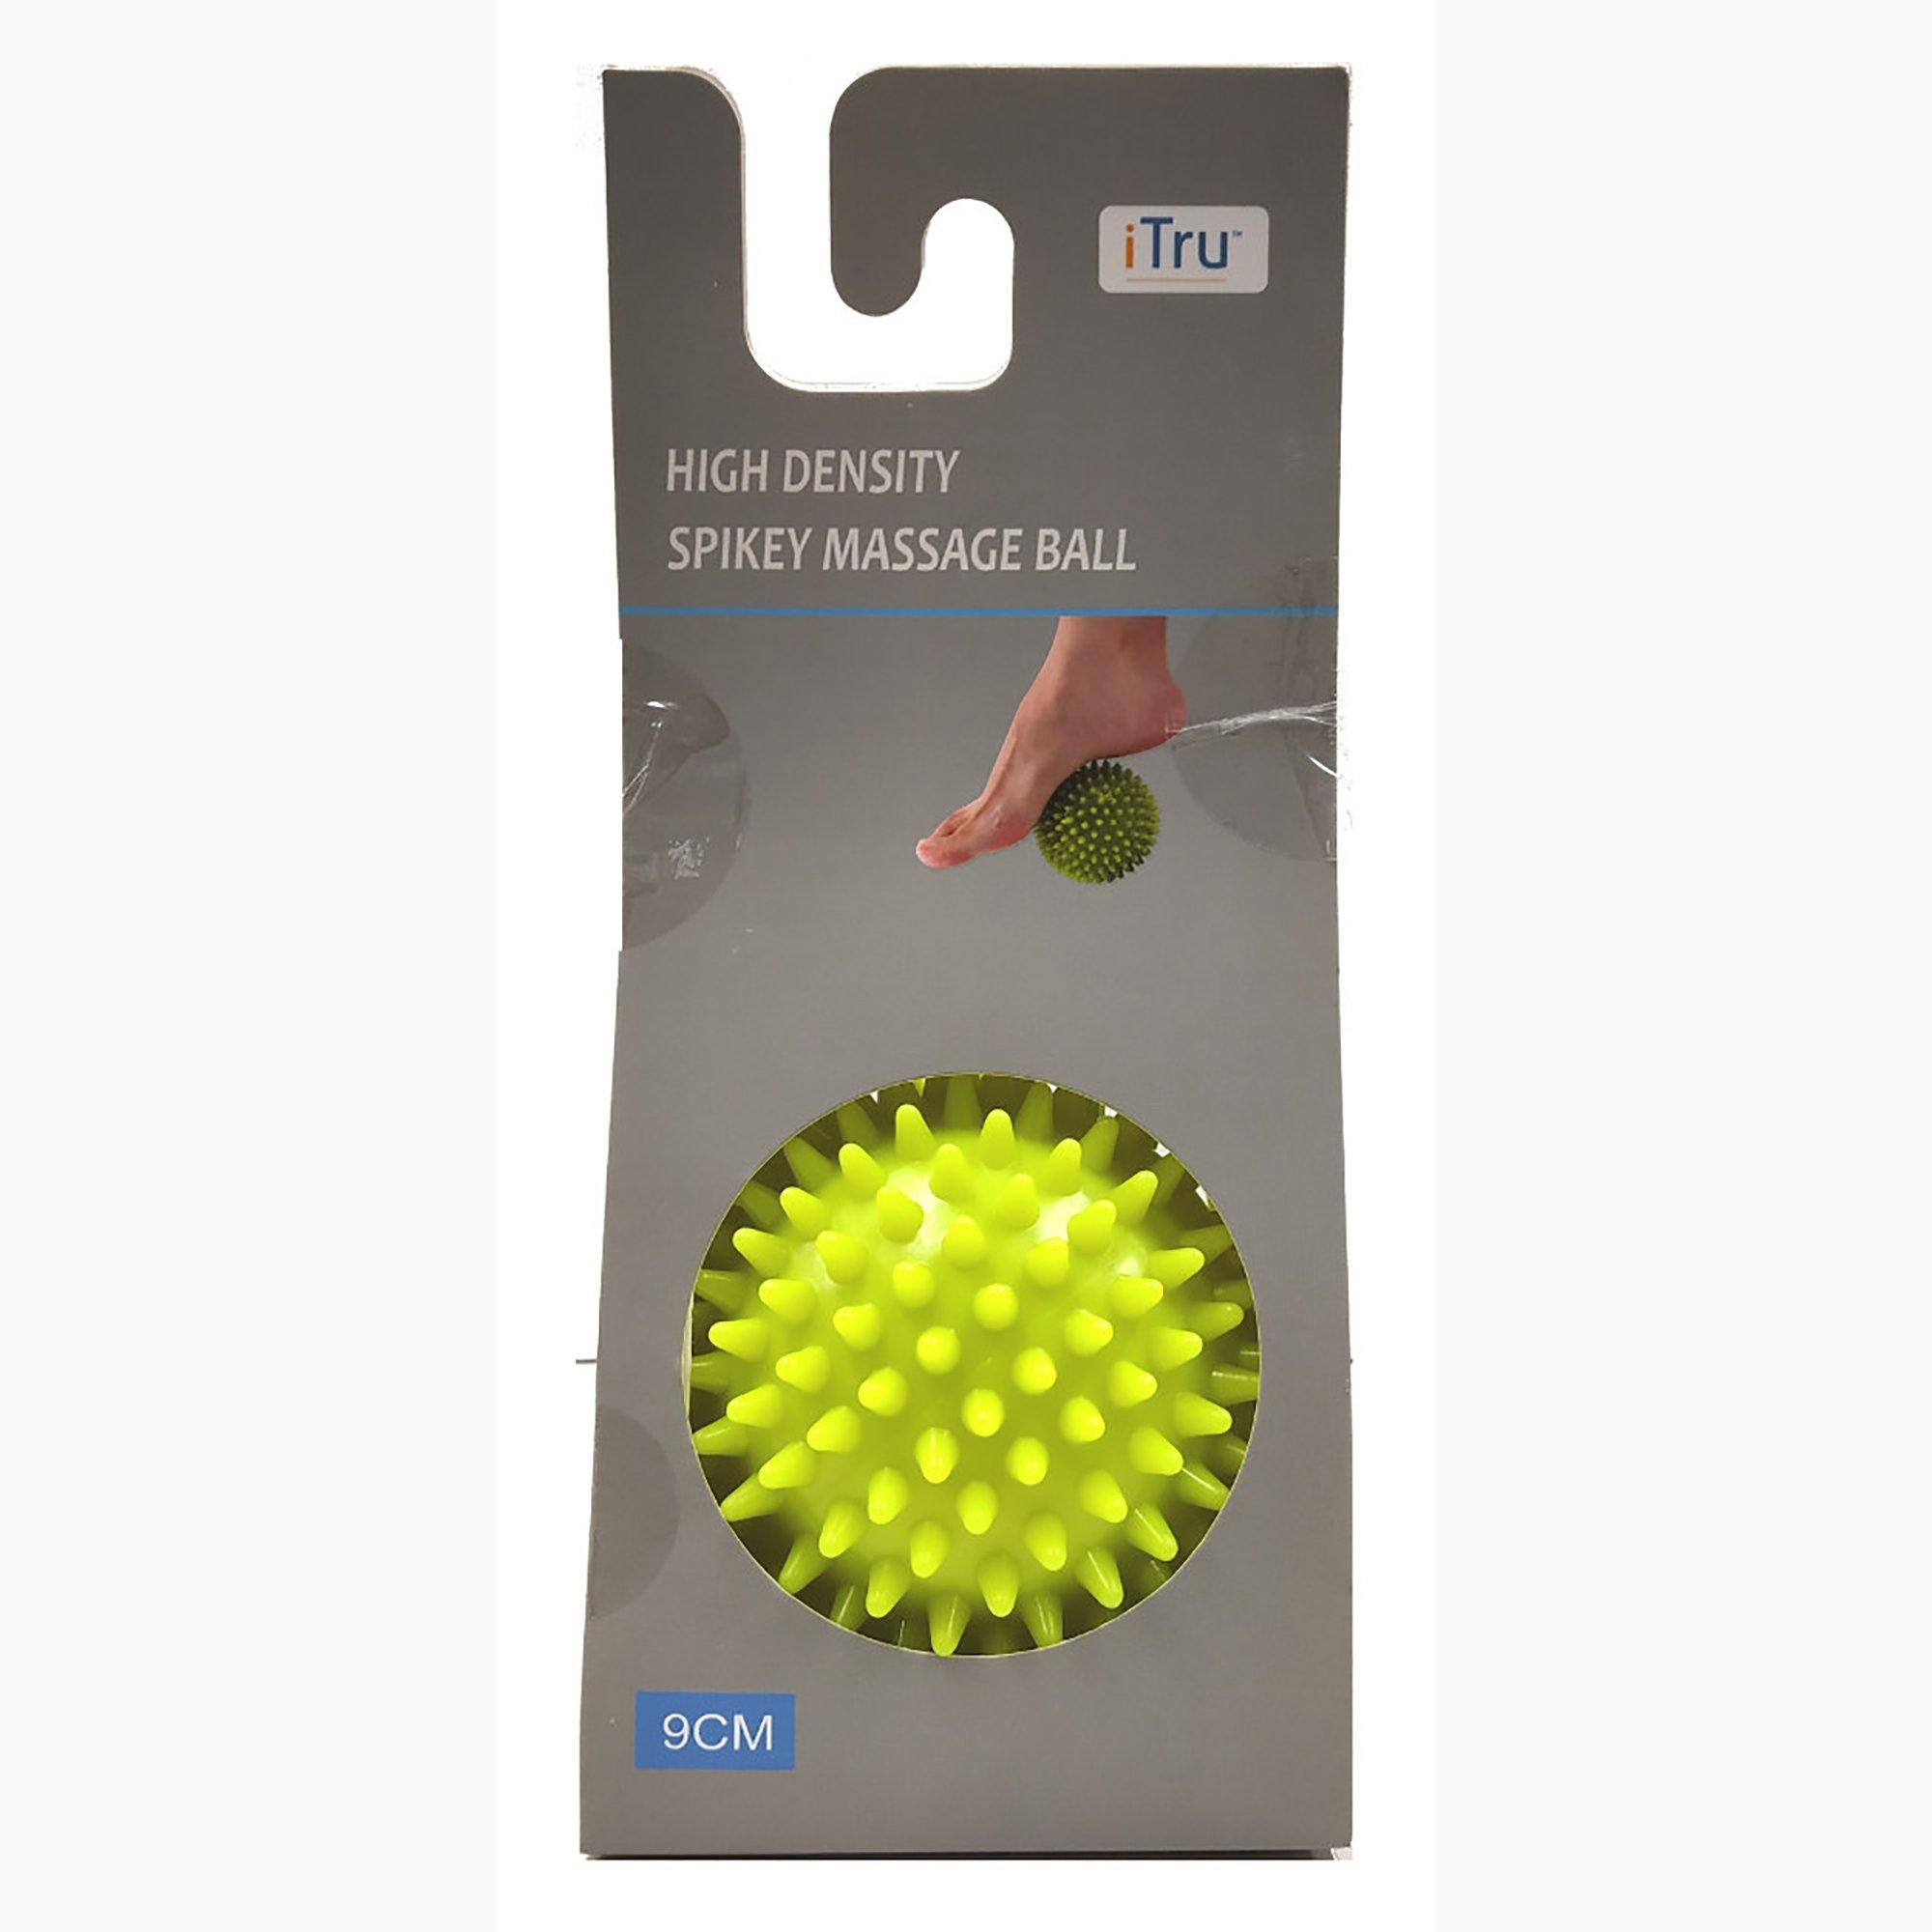 High Density Spiky Massage Ball - 9 Cm - Single Pack - Blue Color. Relieves Stress & Improves Blood Circulation - Dollar Max Depot